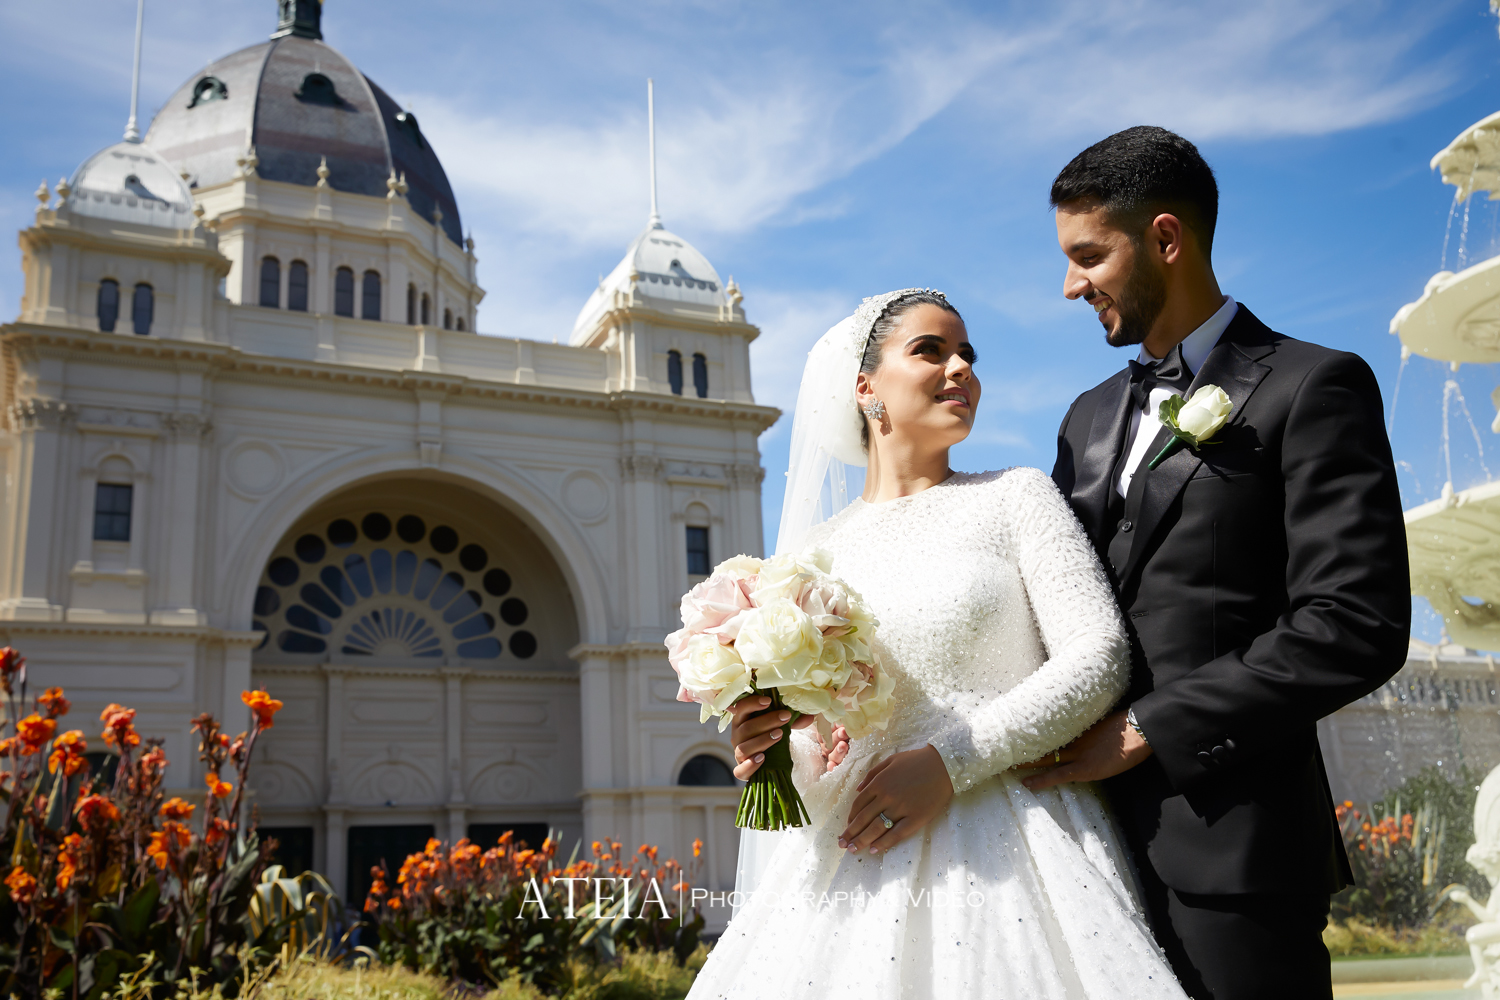 , Crown Casino Wedding Photography Melbourne by ATEIA Photography &#038; Video